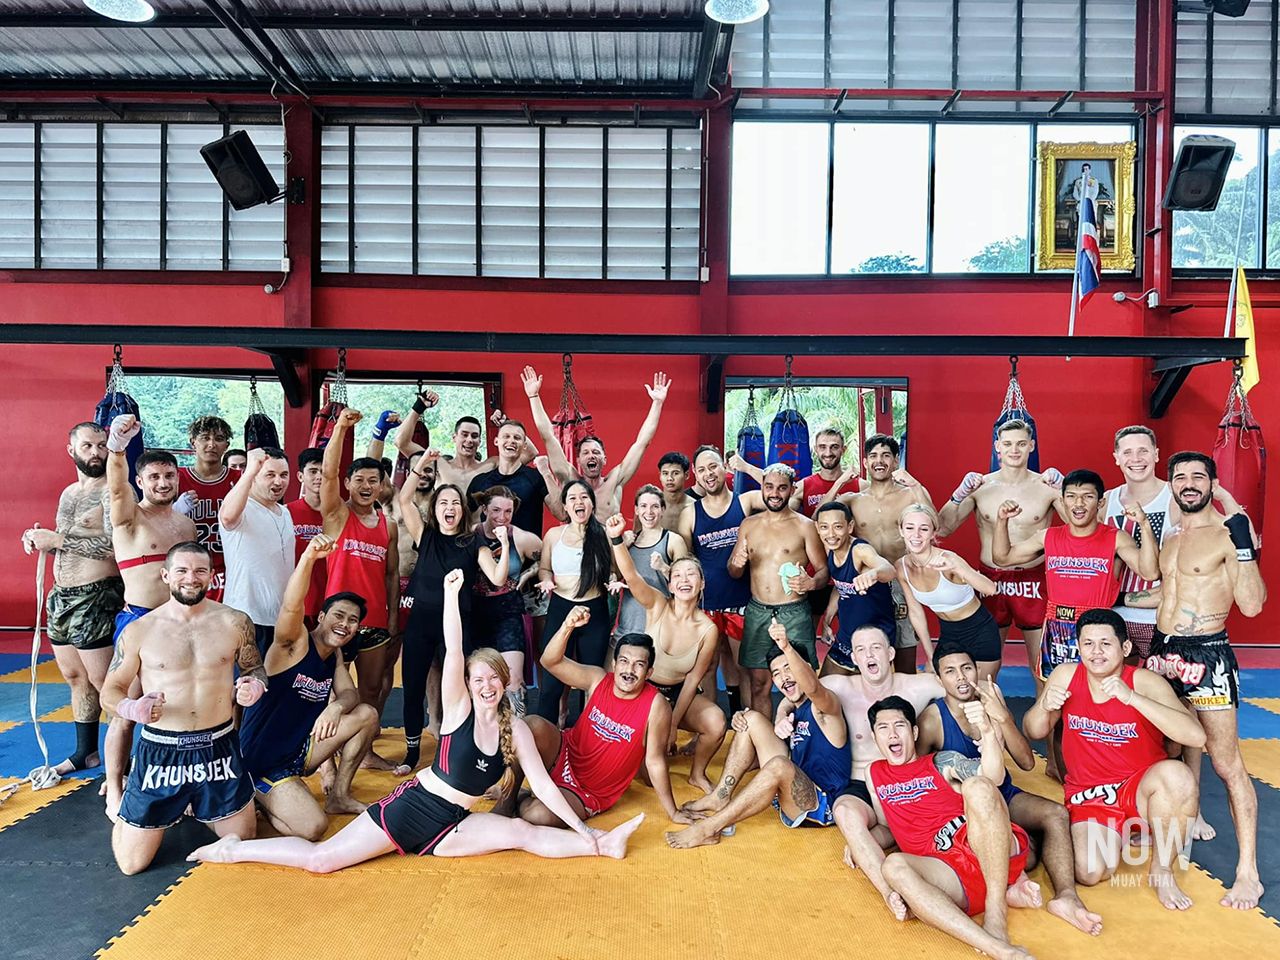 Muay Thai with a community